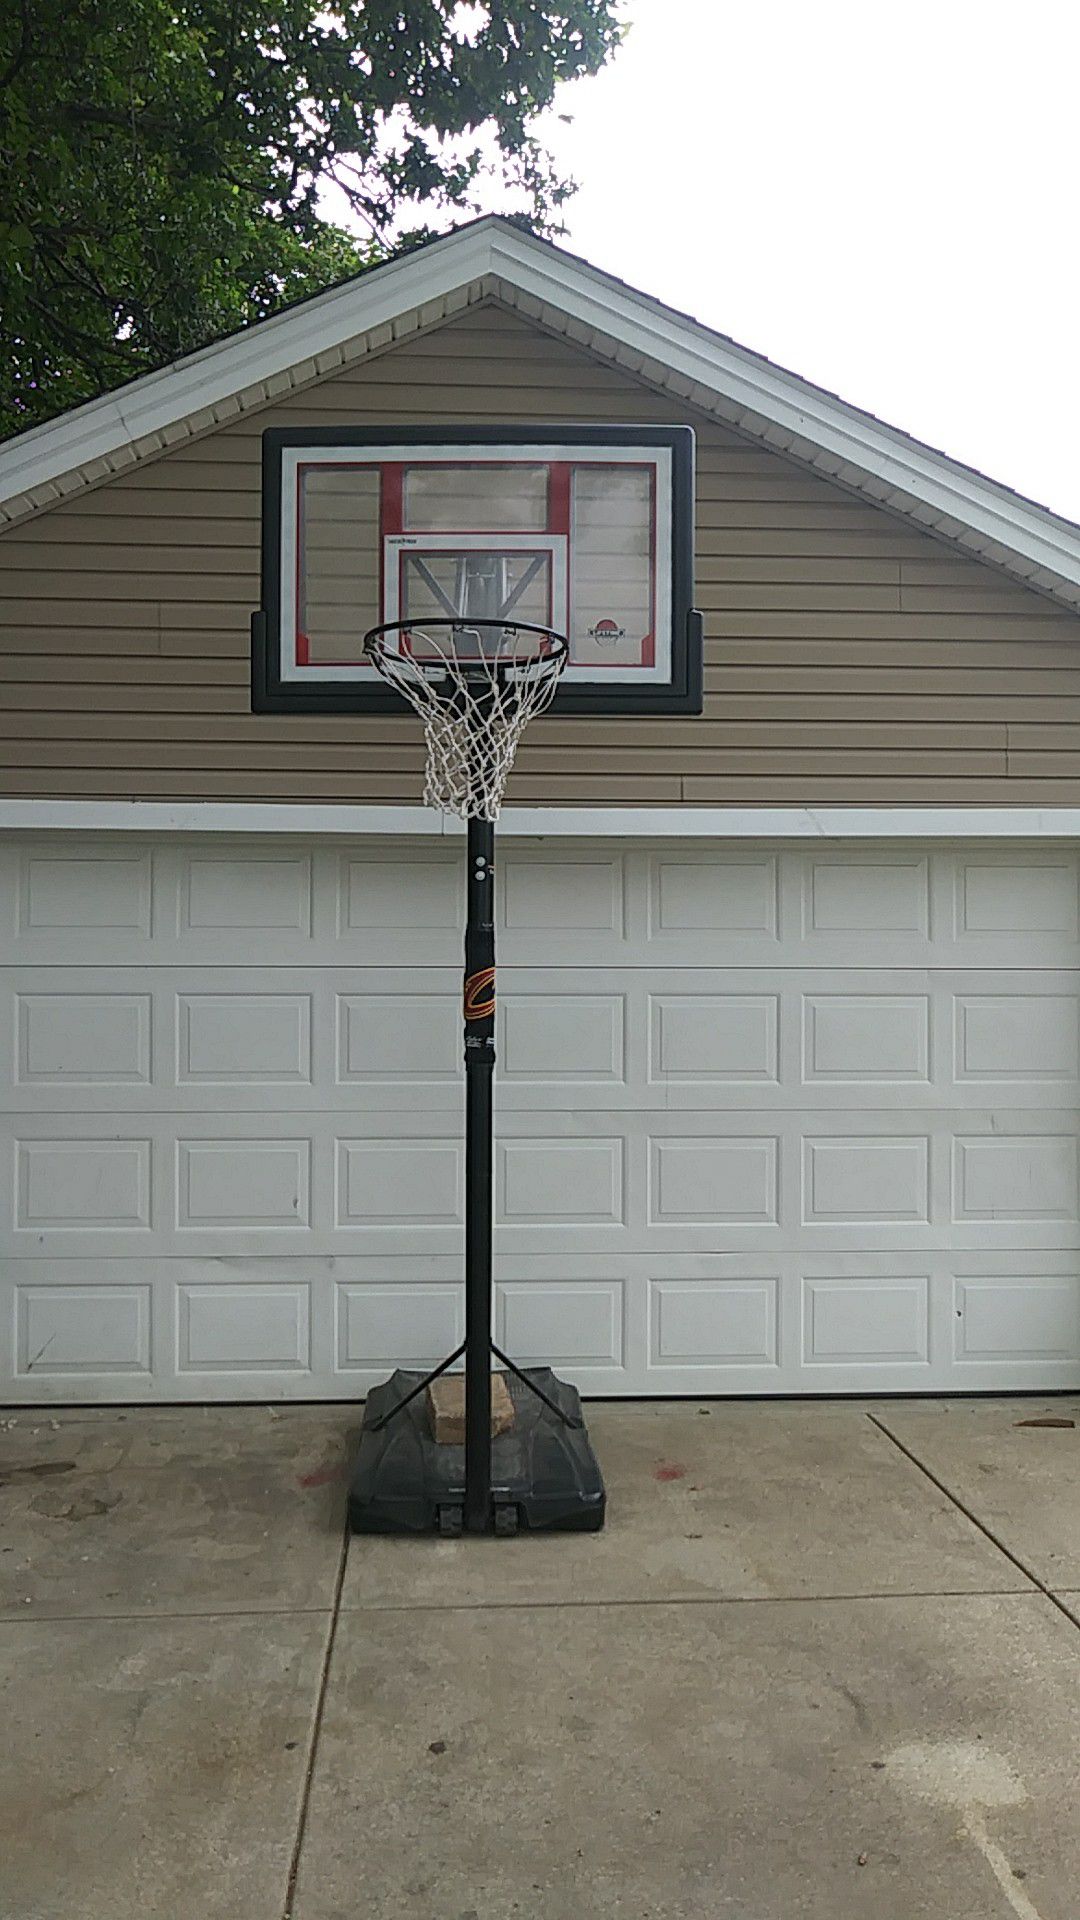 This is an adjustable basketball hoop adjust from 6 ft to 10 ft